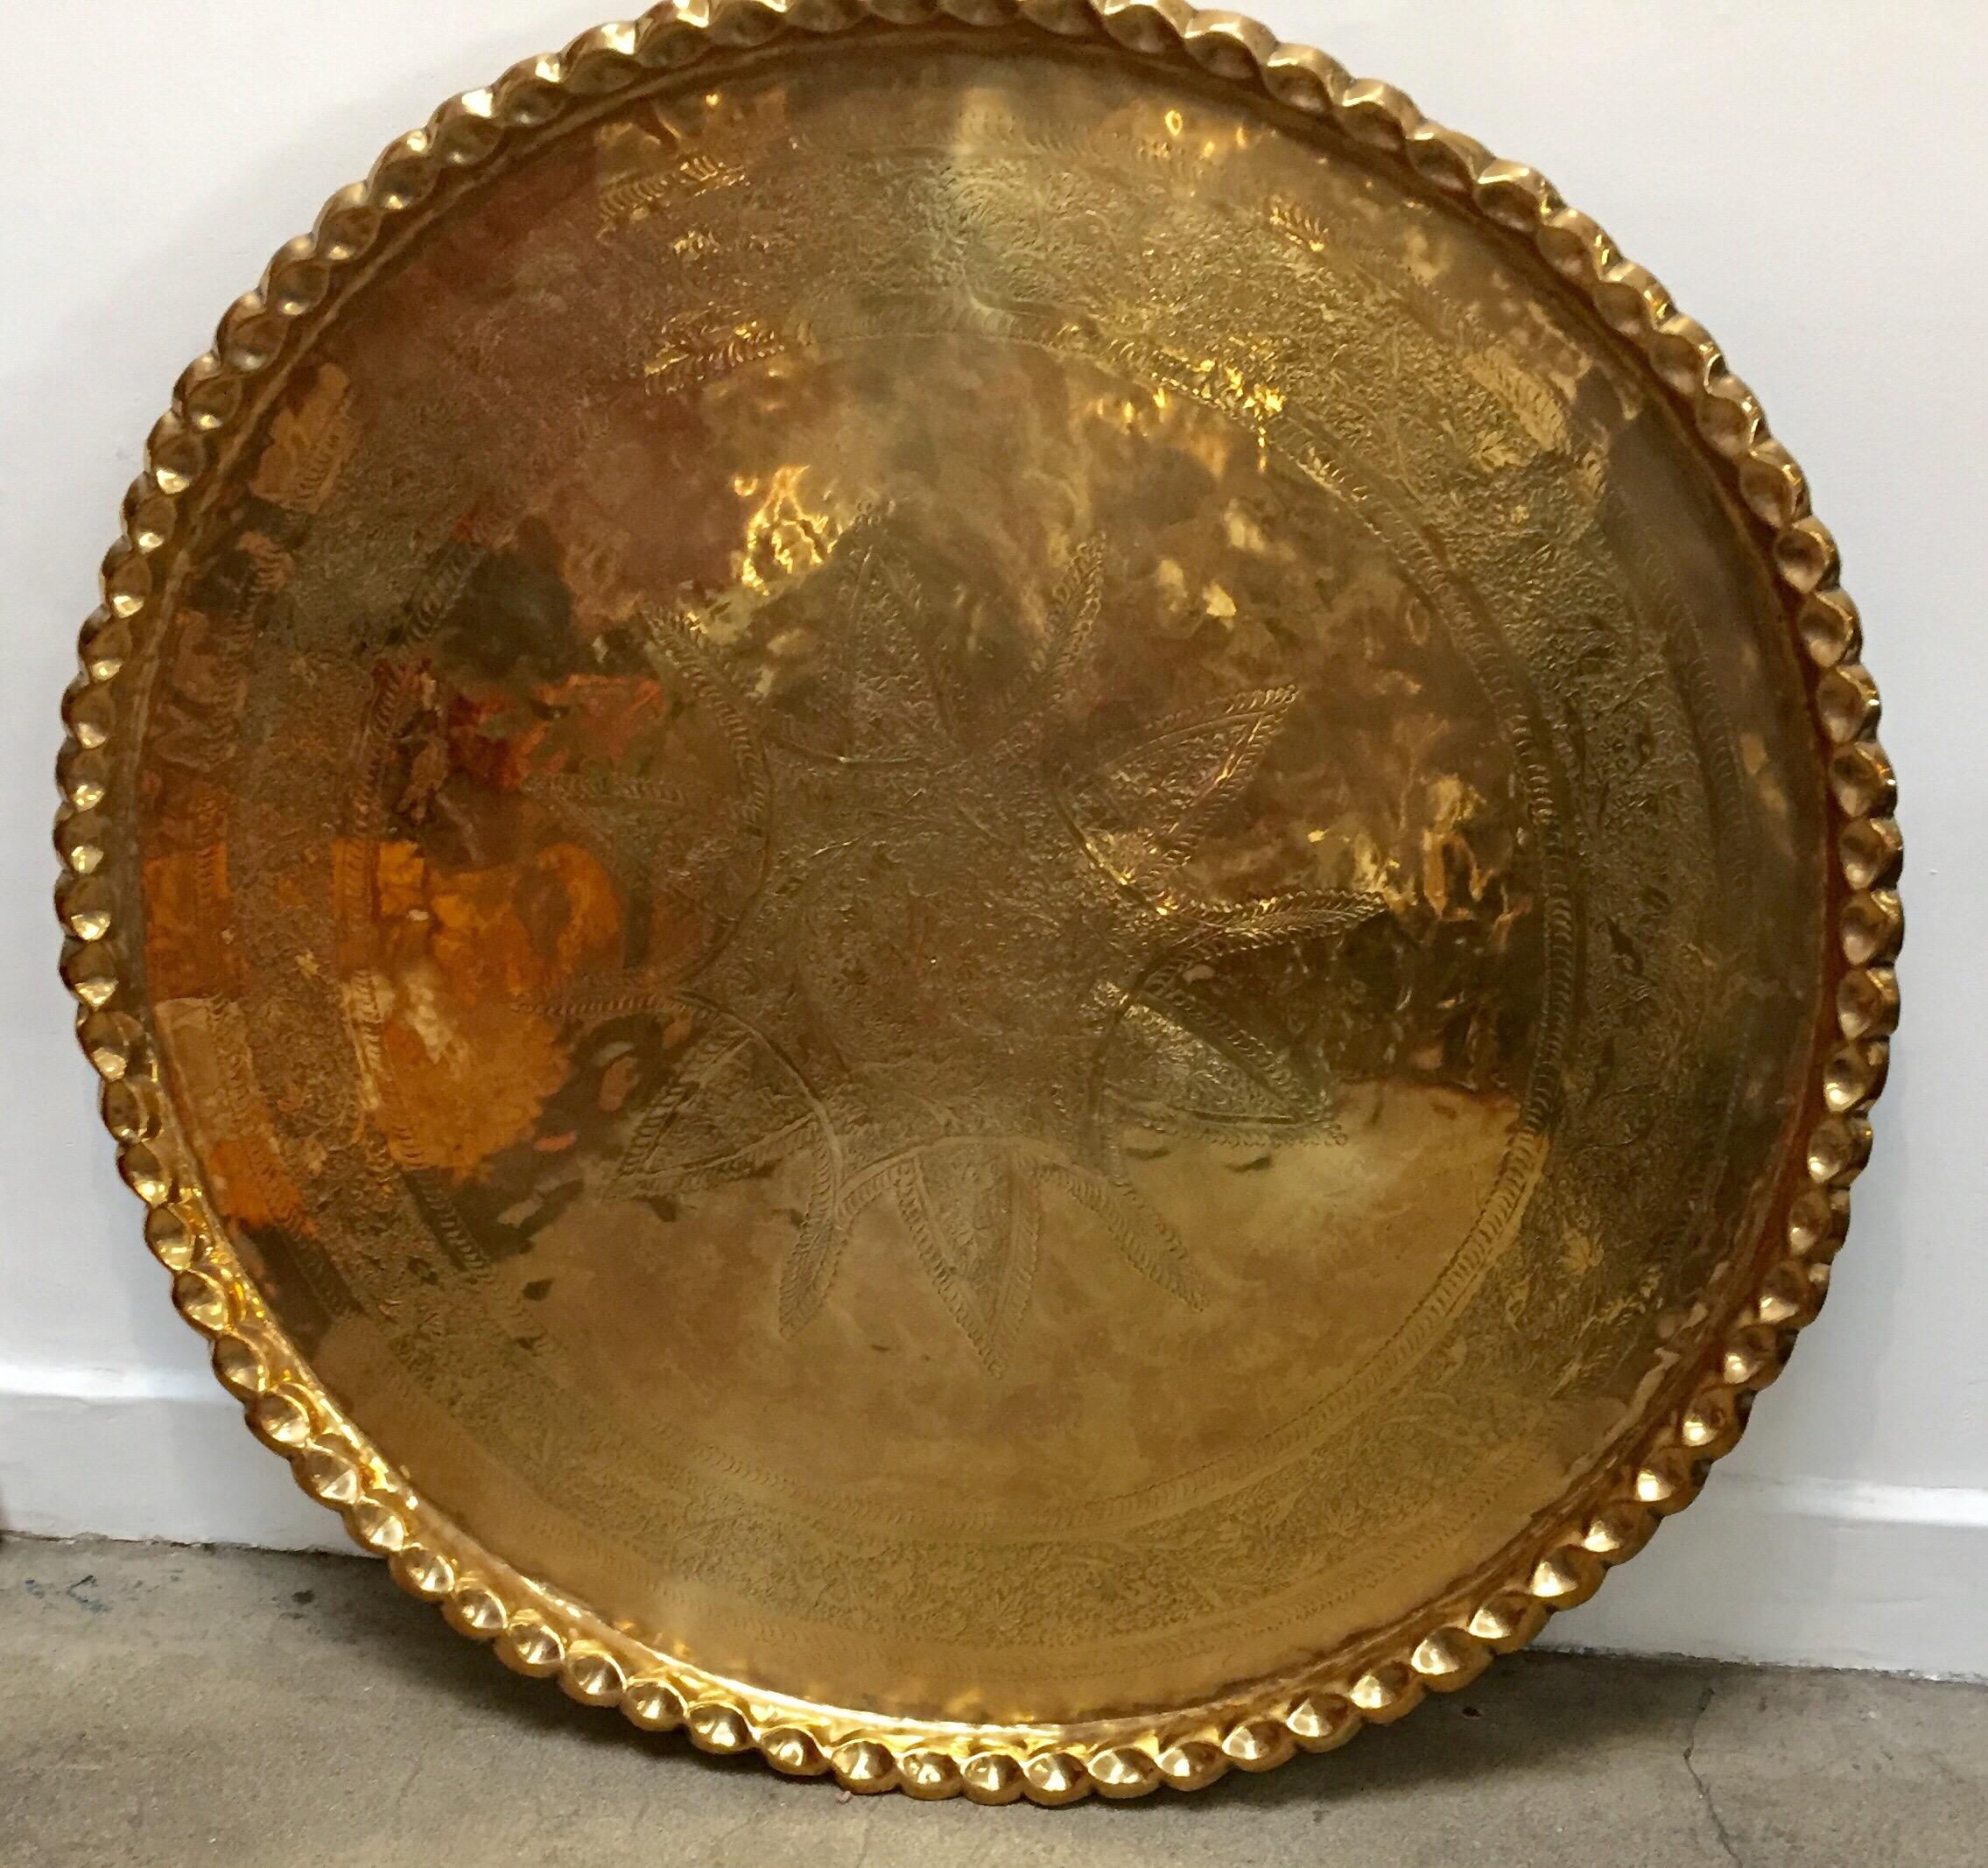 Monumental Moroccan Metal brass tray platter.
Polished decorative metal brass tray with very fine intricate designs.
Hand-hammered and chiseled in floral Moorish style with a large lotus flower in the middle, pie crust border.
Heavy brass metal